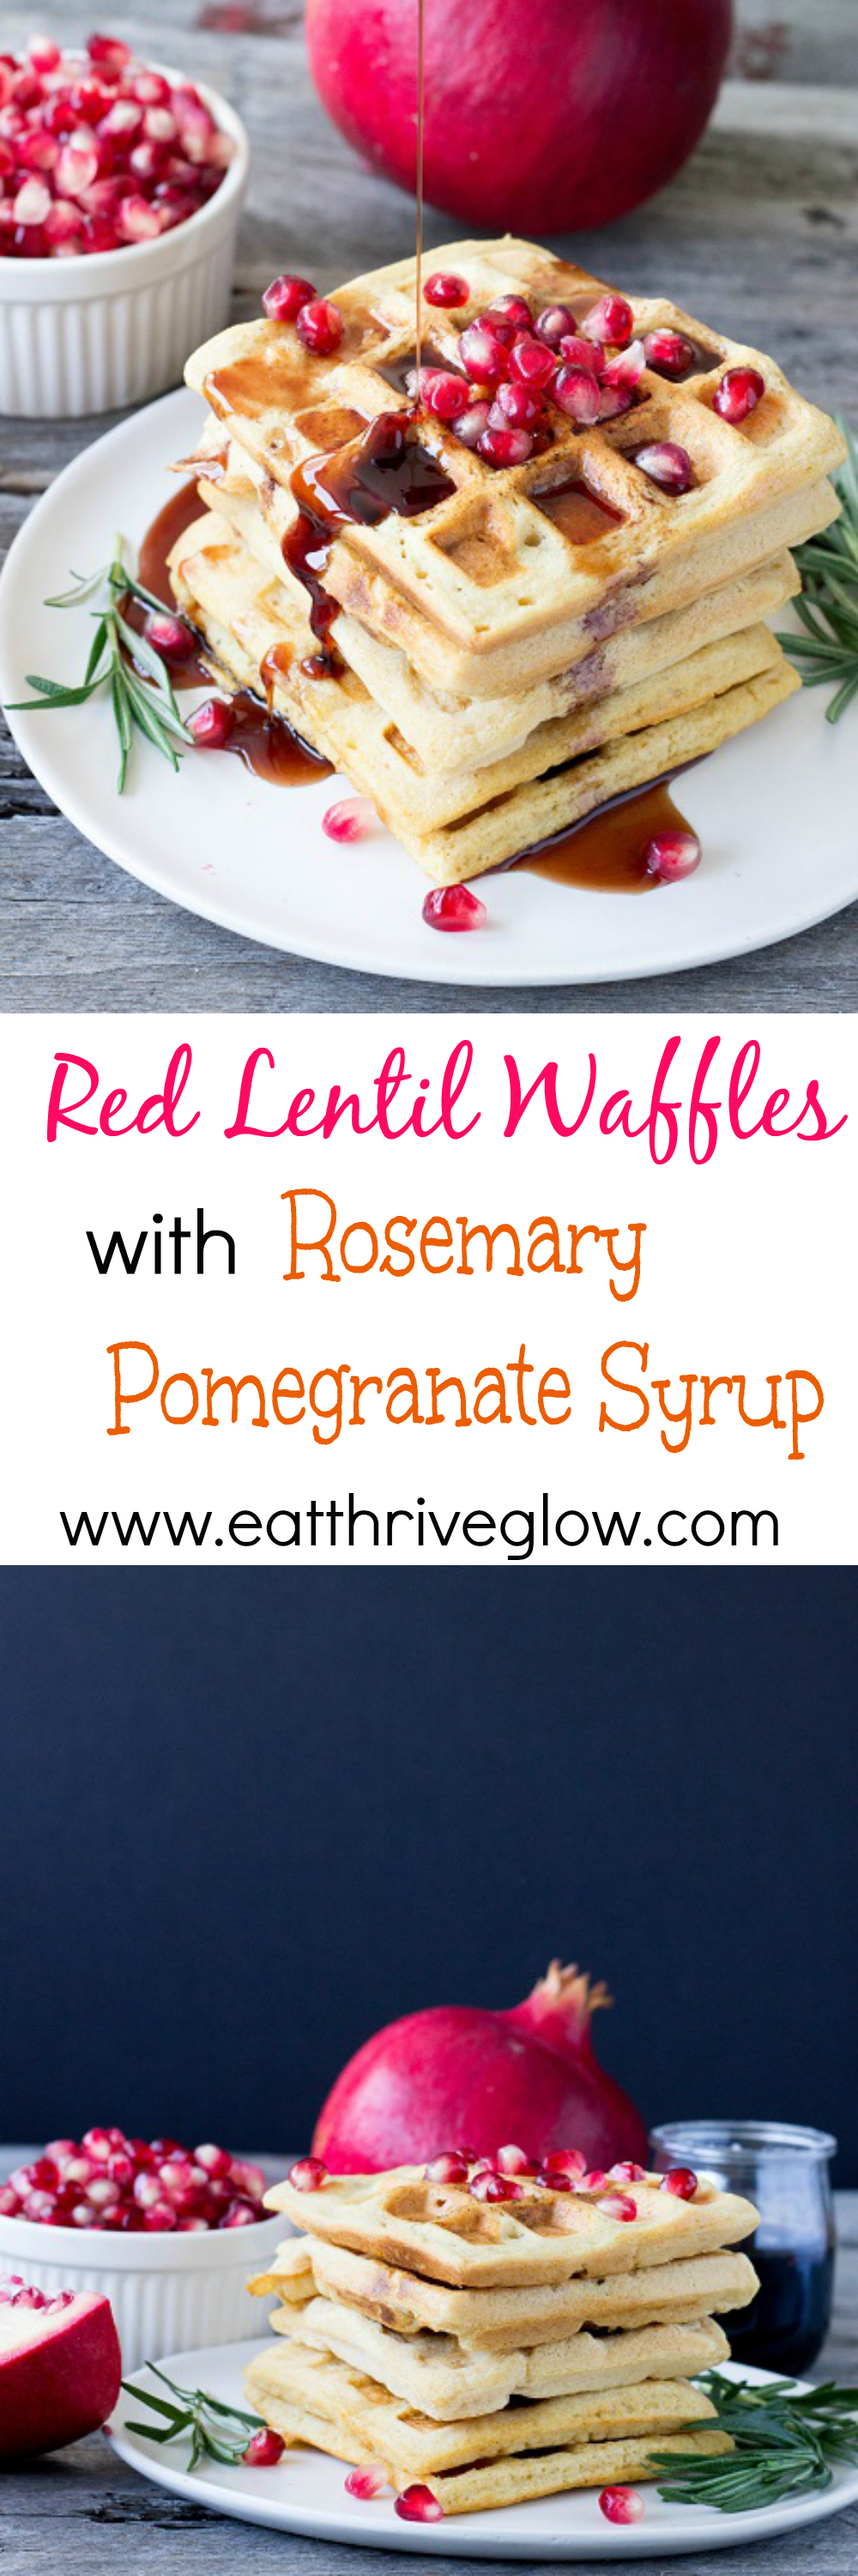 Red Lentil Waffles with Rosemary Pomegranate Syrup - Eat Thrive Glow